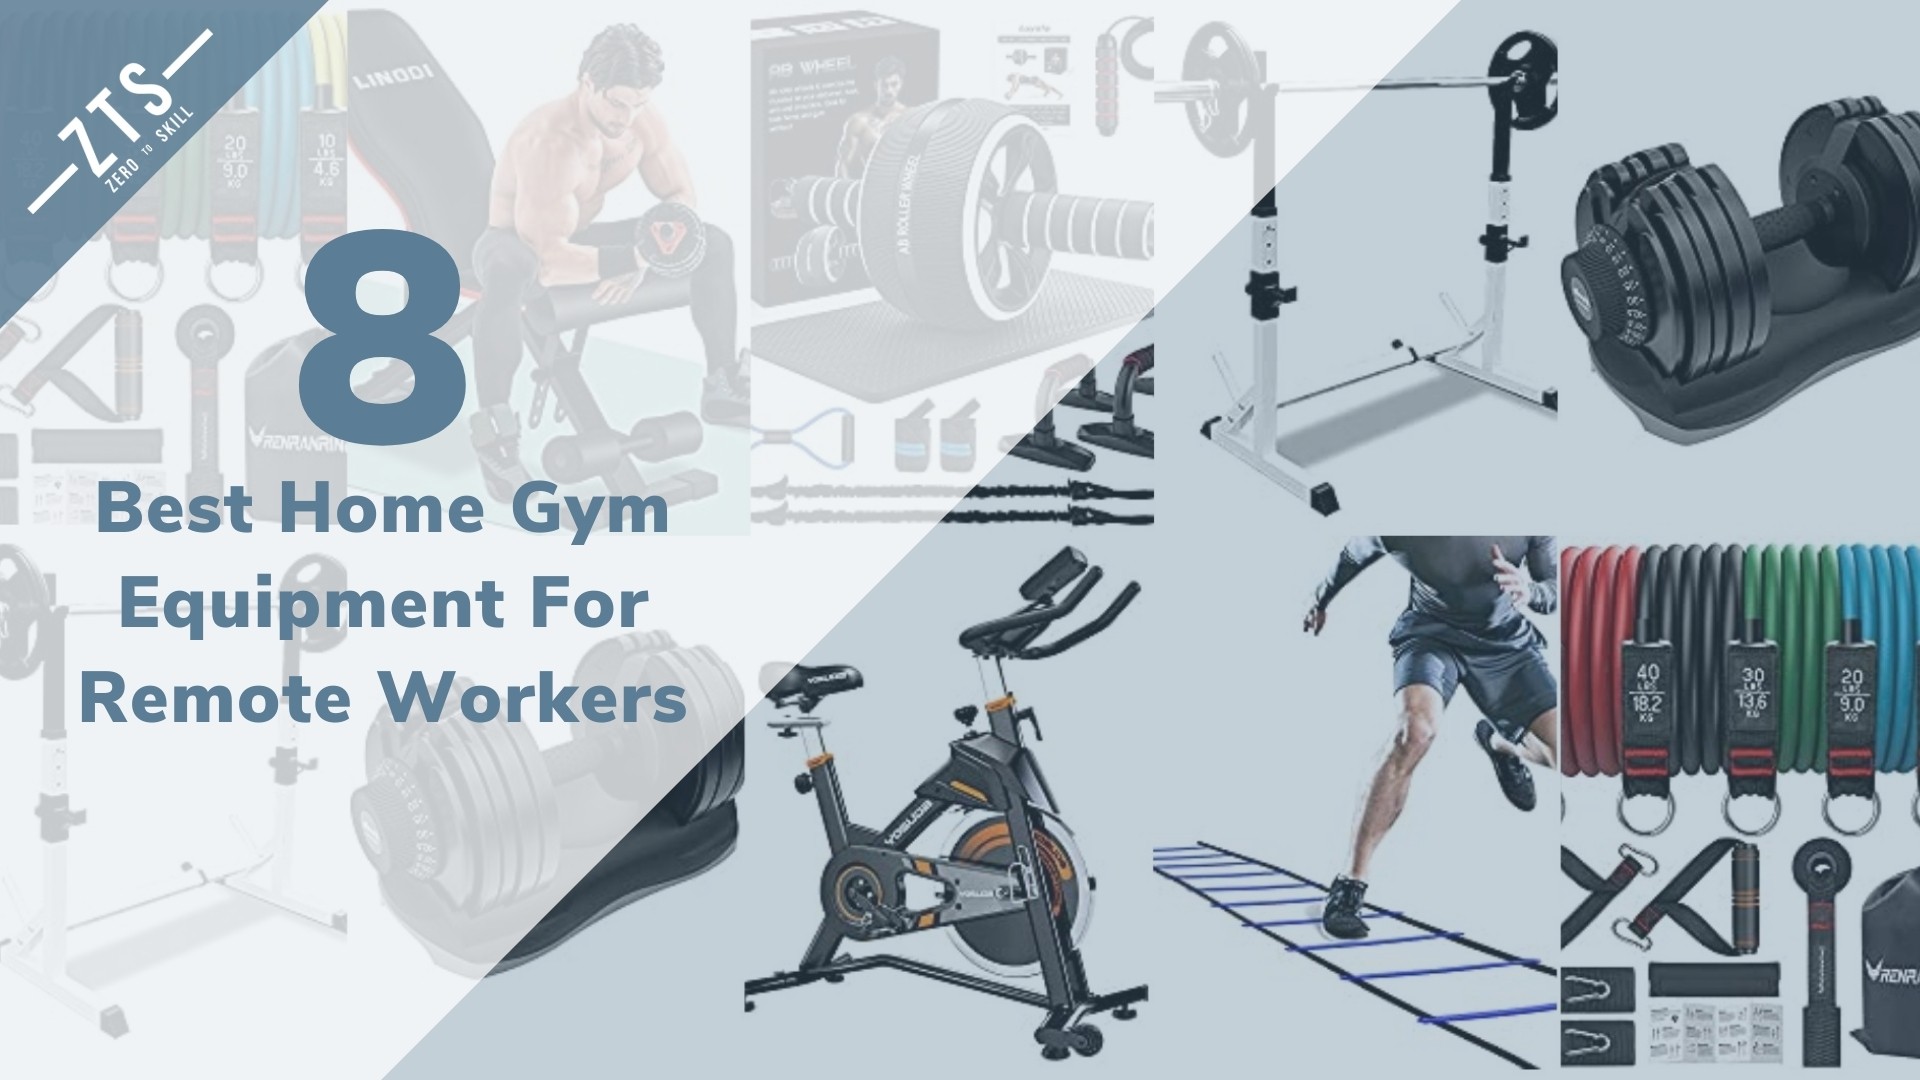 The 8 Best Home Gym Equipment For Remote Workers